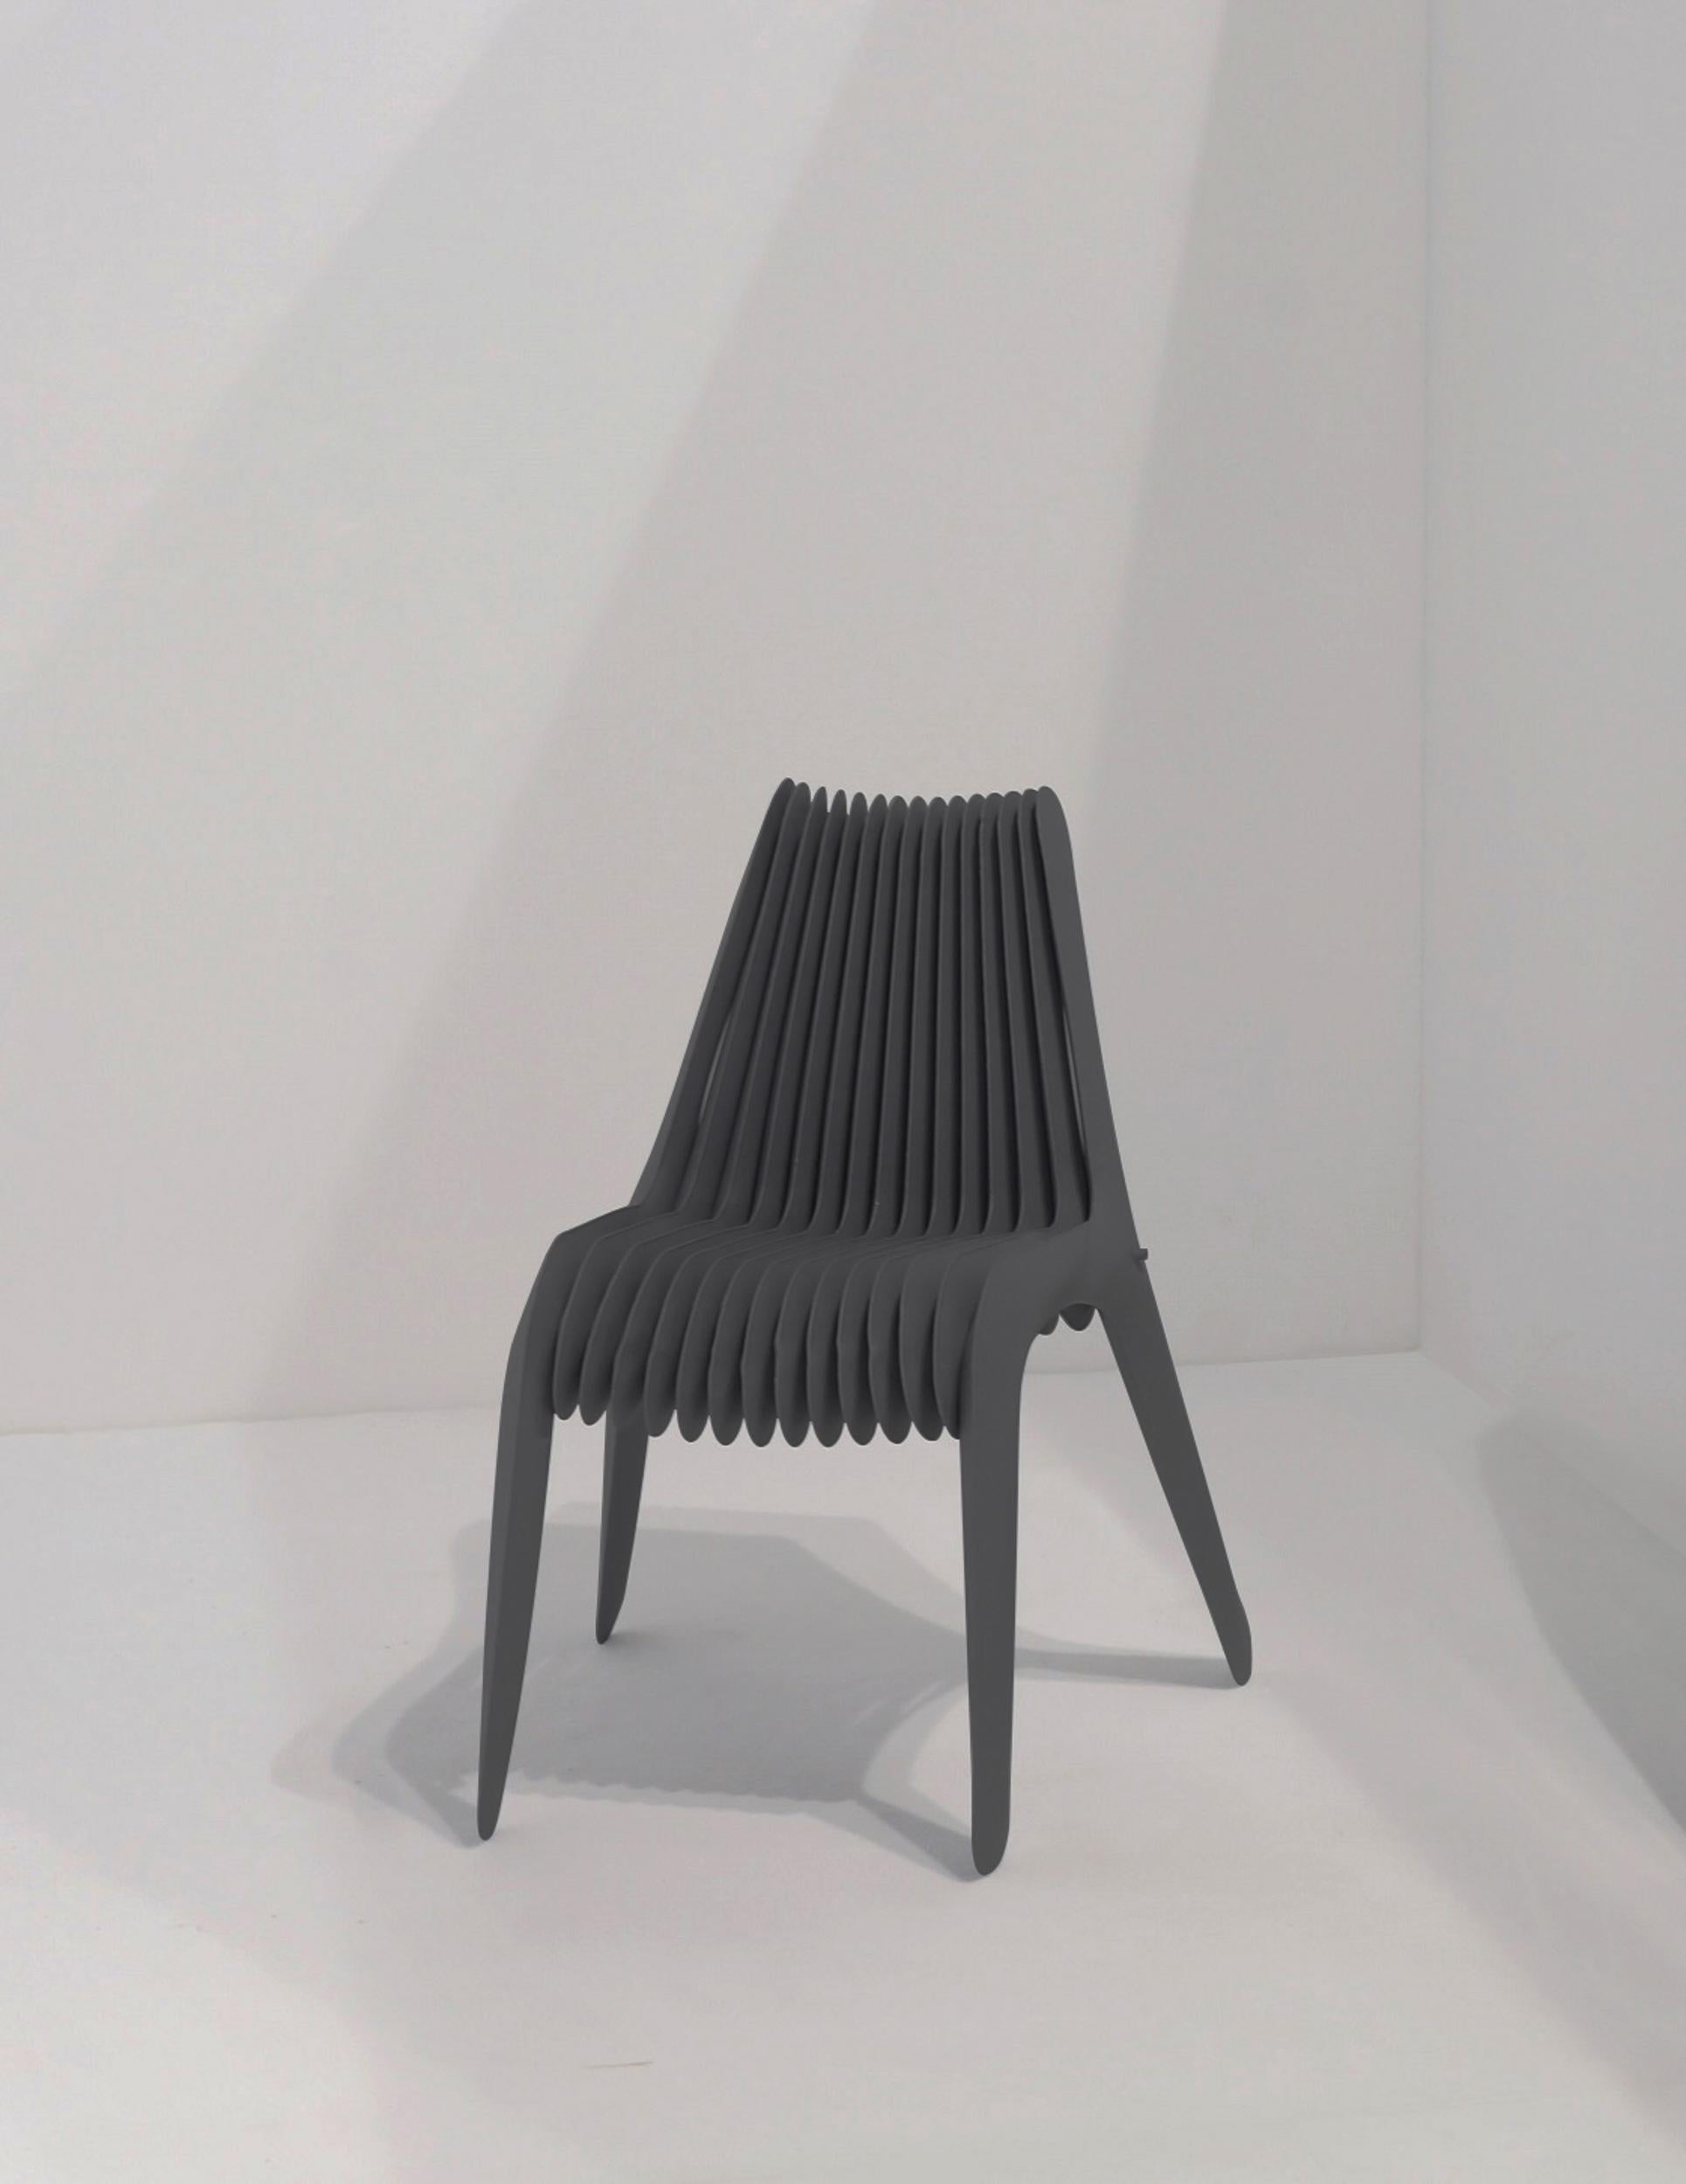 Steel In Rotation Chair by Zieta, stainless steel (inox)

Measures: 80 x 45 x 60 cm.

SIR NO. 3 CHAIR is a conceptual dialogue between design and art. Like many of Oskar Zieta’s objects, SIR chairs broaden the borders between disciplines. The